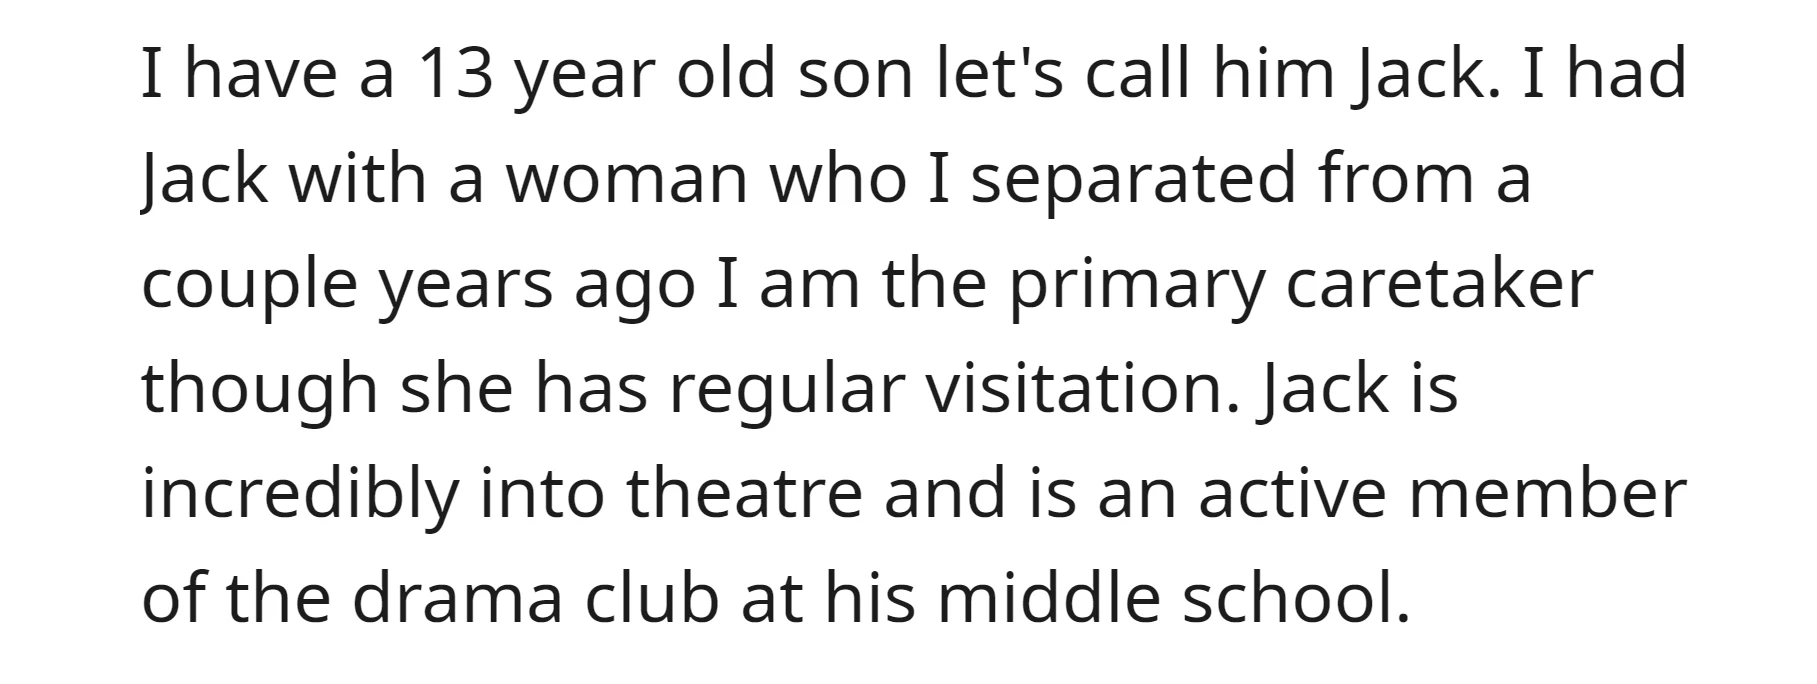 OP's son, Jack, is passionate about theatre, actively participating in the drama club at his middle school